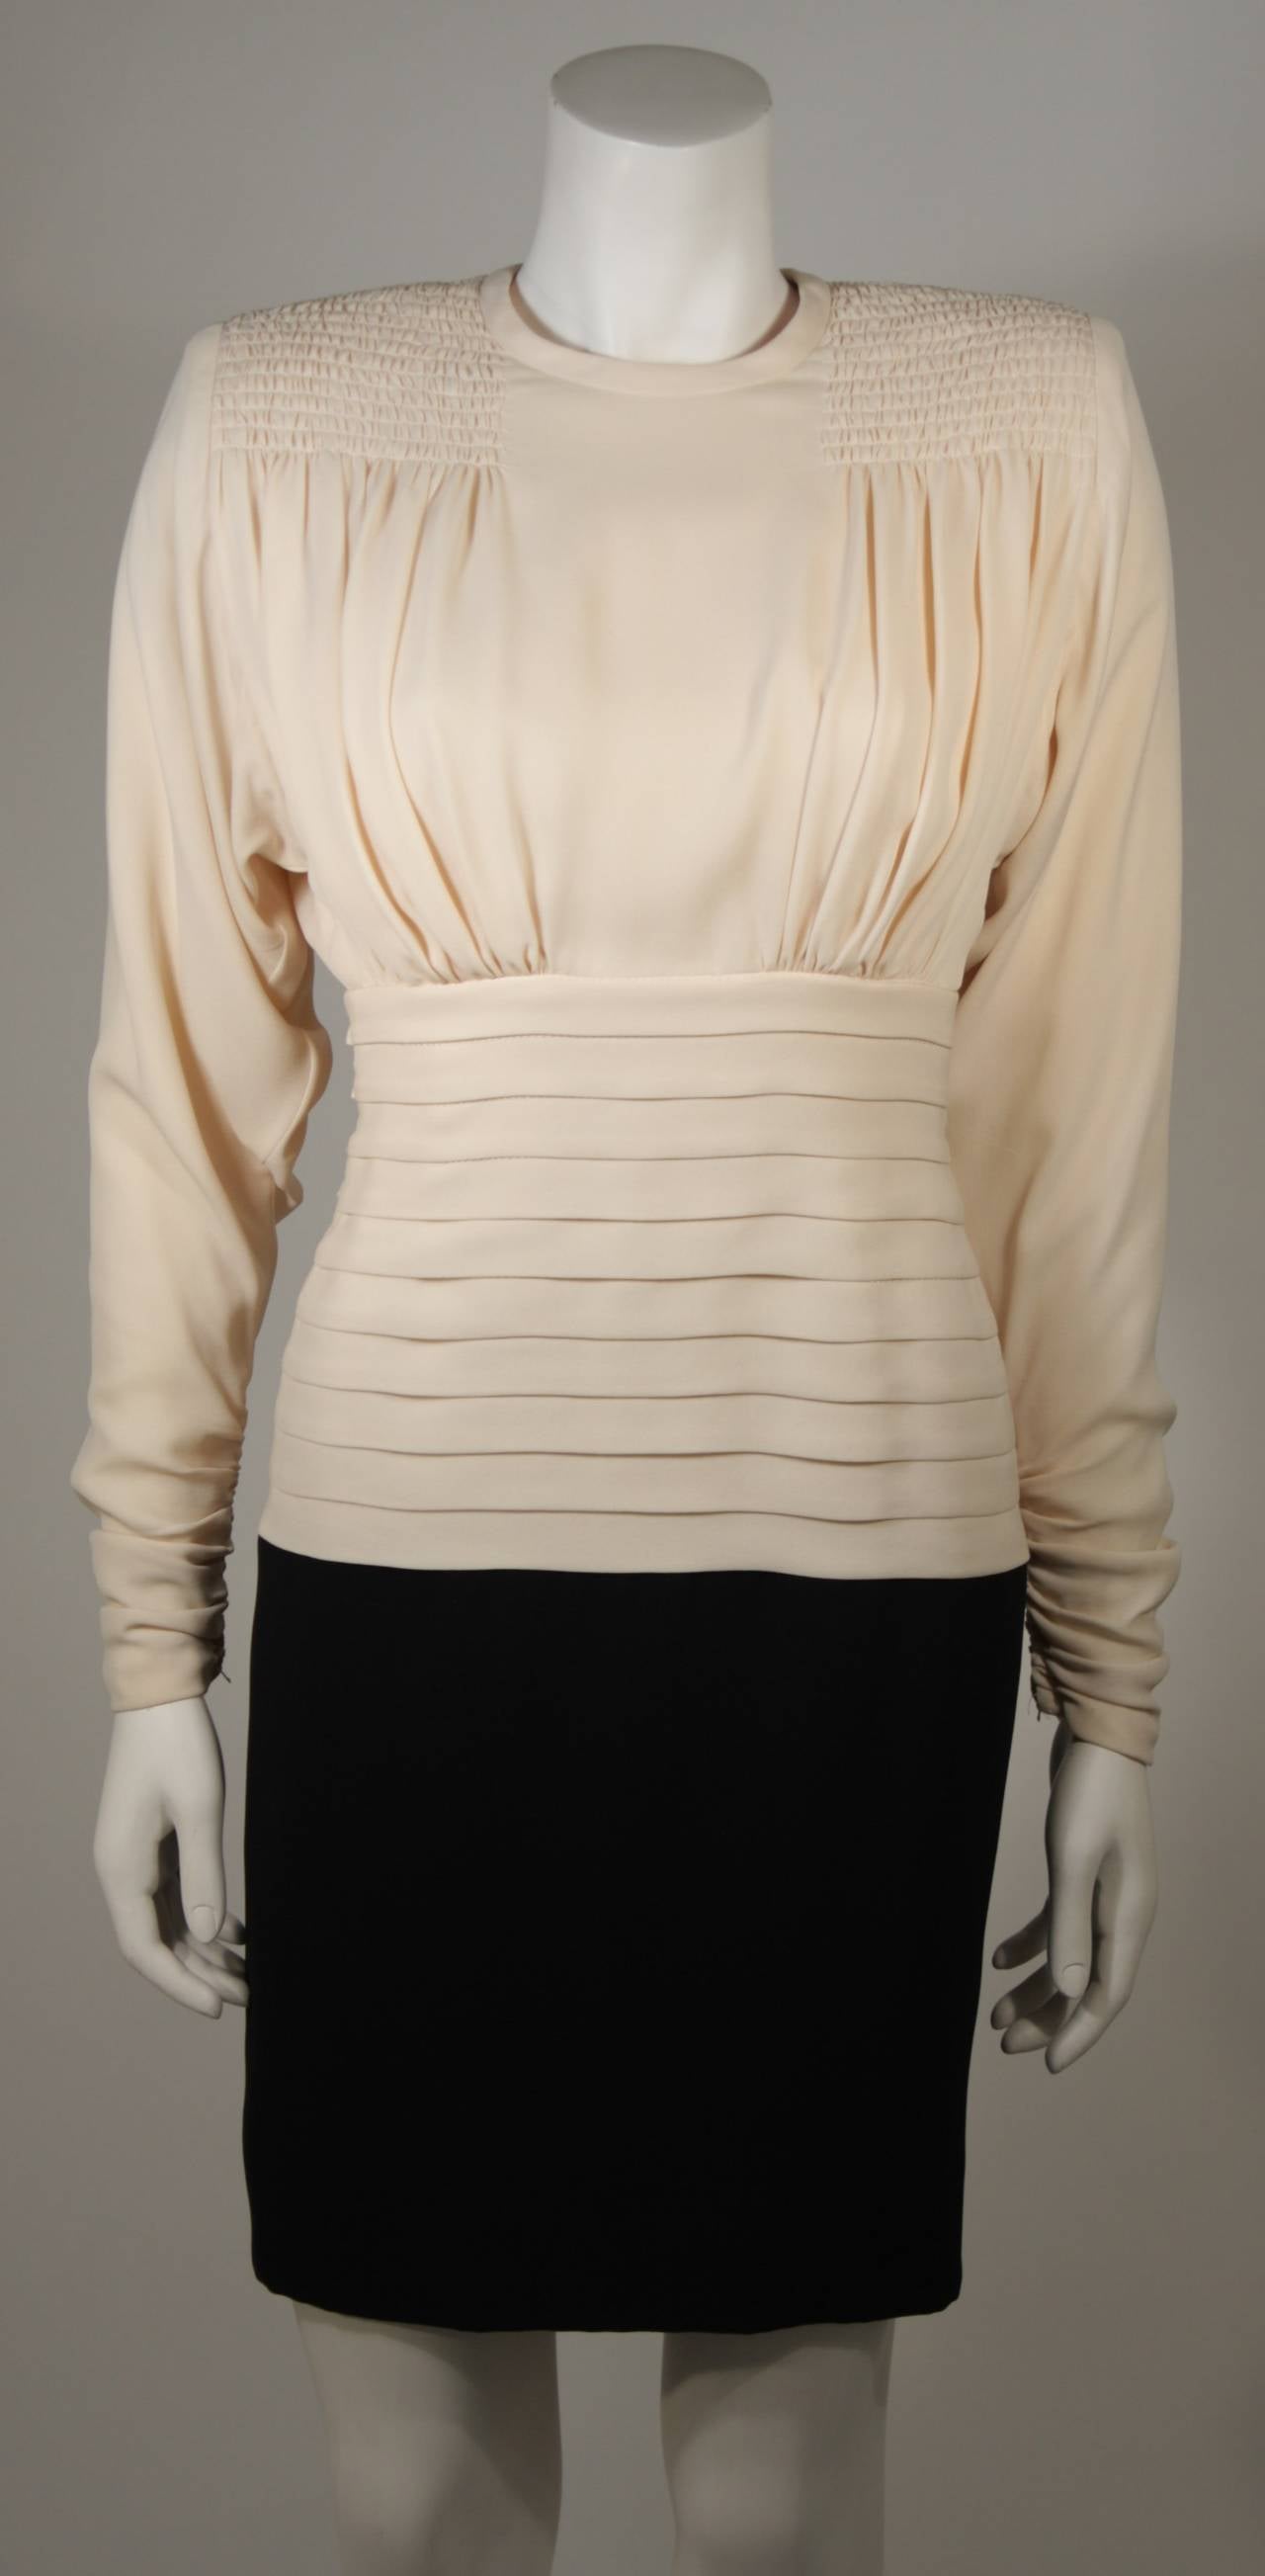 Women's Galanos Attributed Pleated Ivory and Black Silk Cocktail Dress Size 2-4